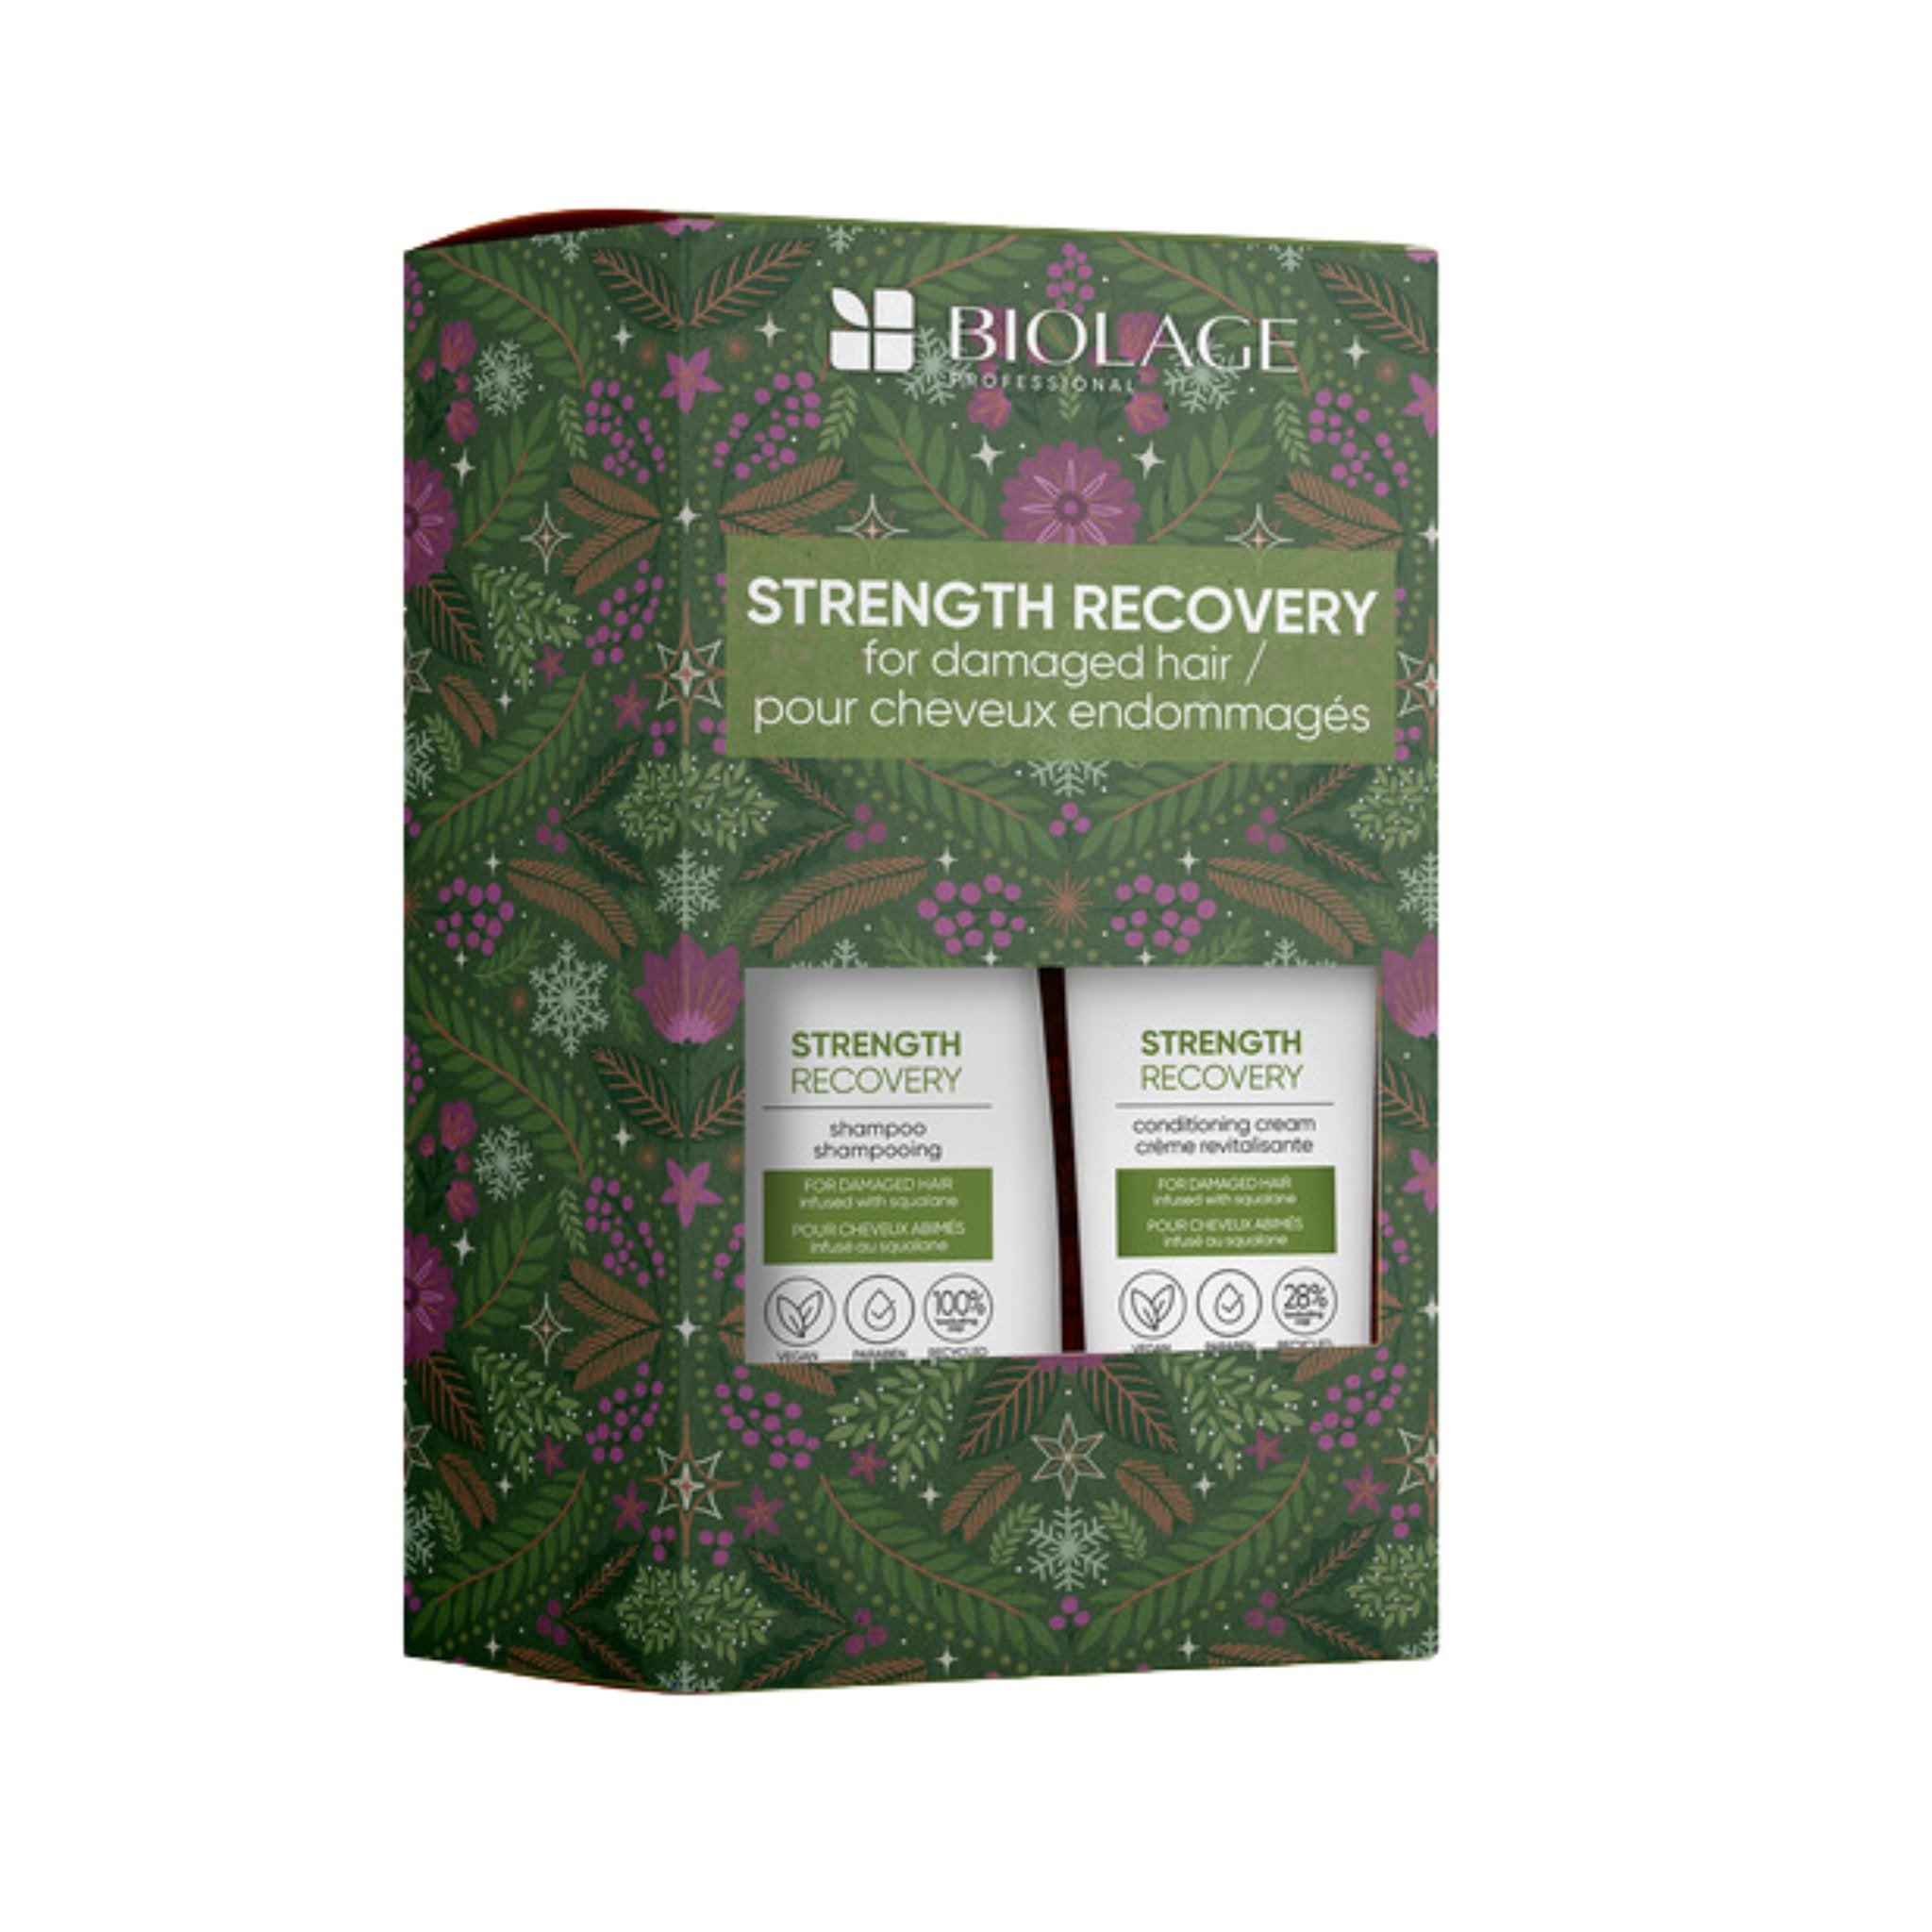 Biolage. Coffret Duo - Strenght Recovery - Concept C. Shop